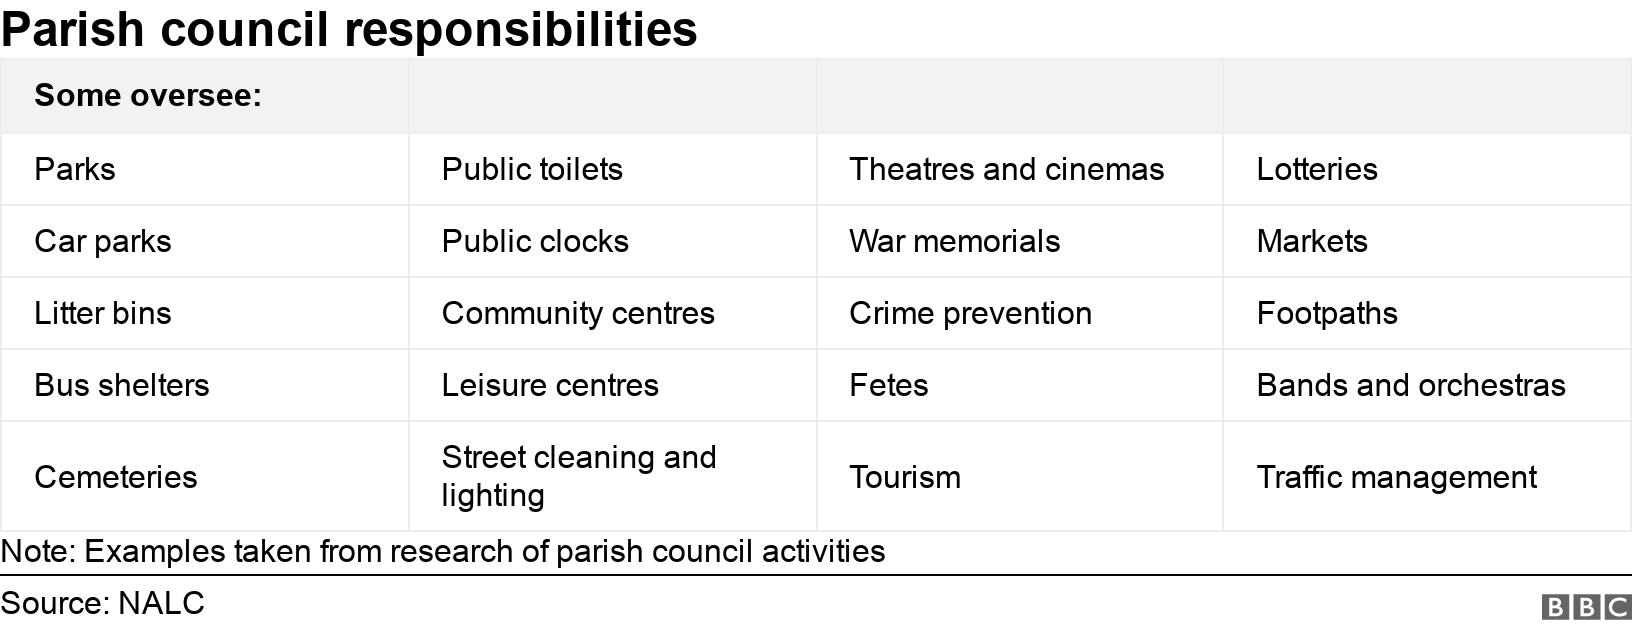 Parish council responsibilities. .  Note: Examples taken from research of parish council activities.